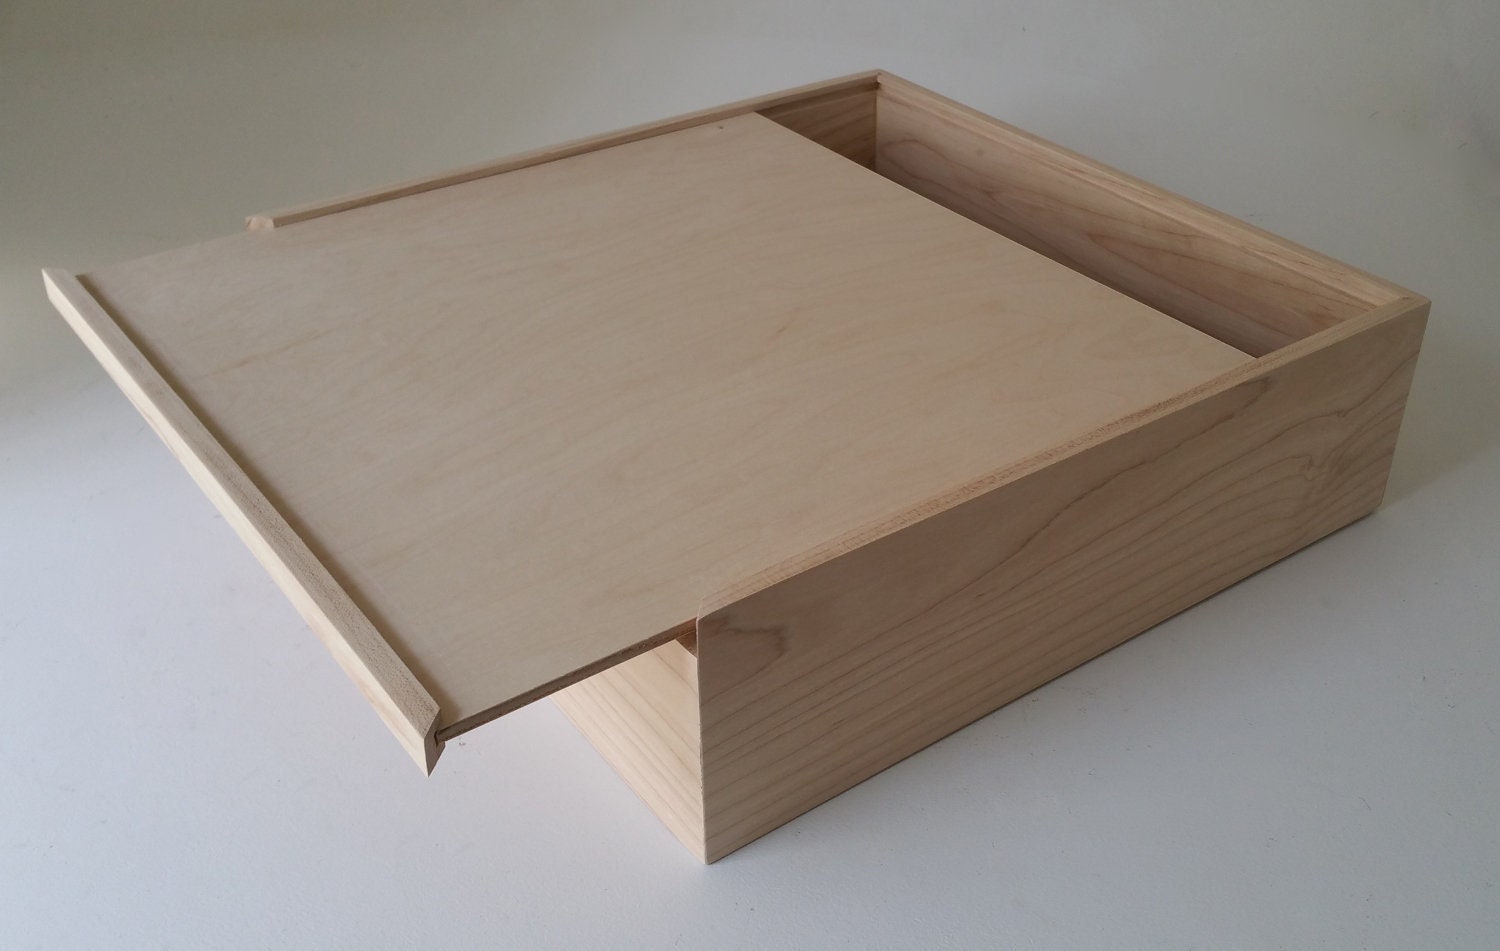 Make a Sleek Box with a Sliding Lid - FineWoodworking